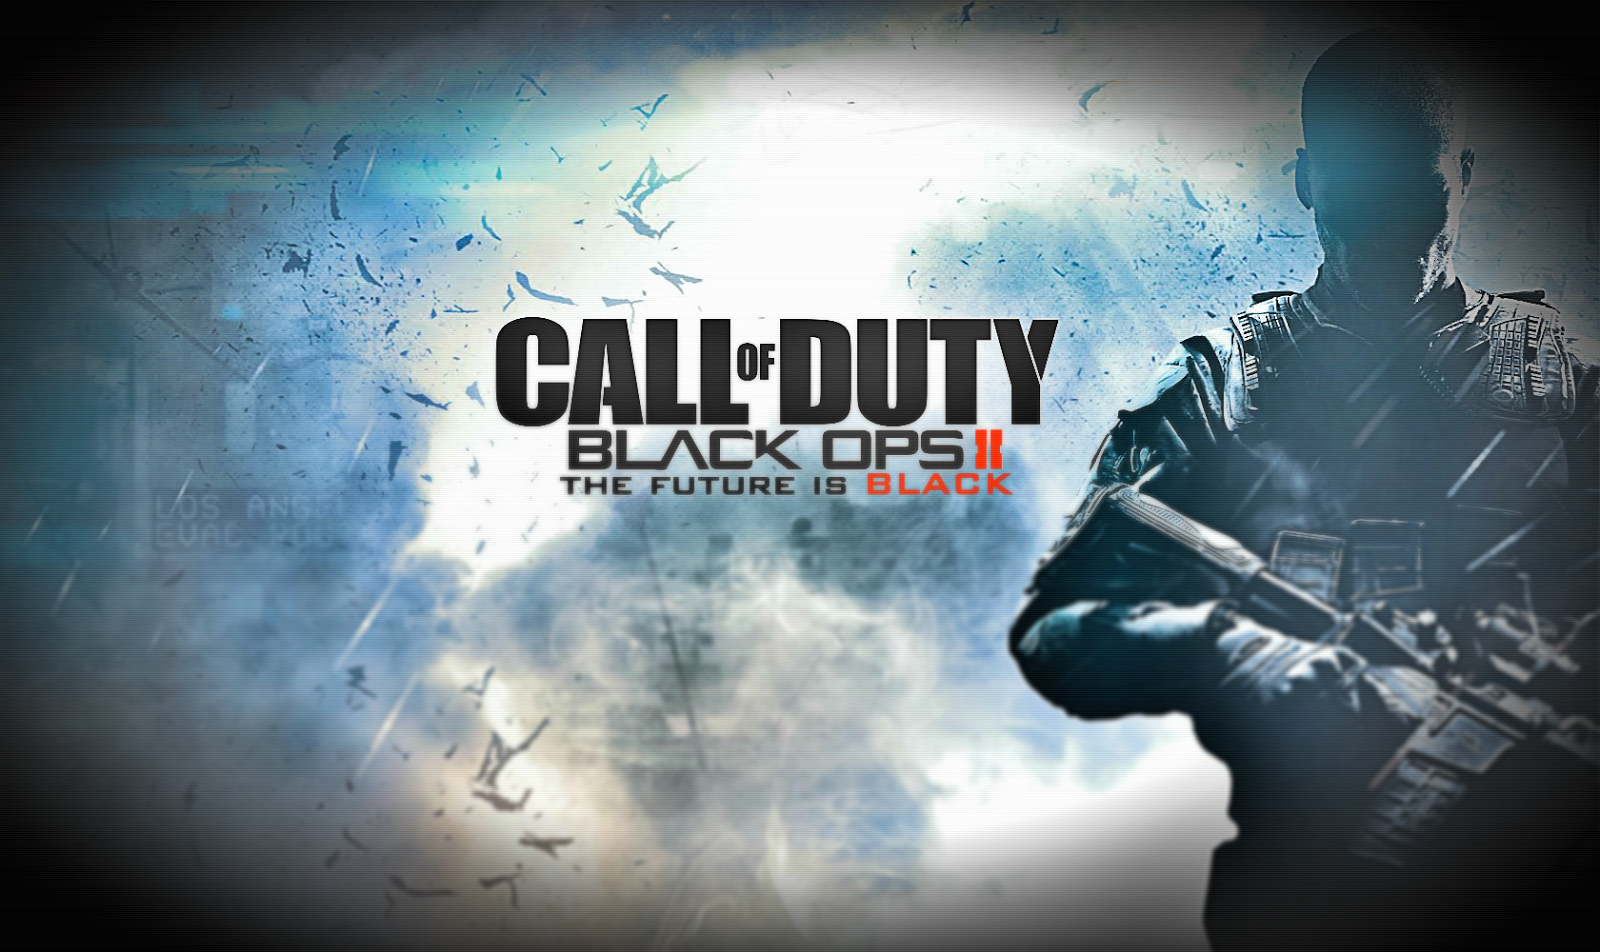 Quotes Fun And Pictures: Black Ops 2 Wallpaper